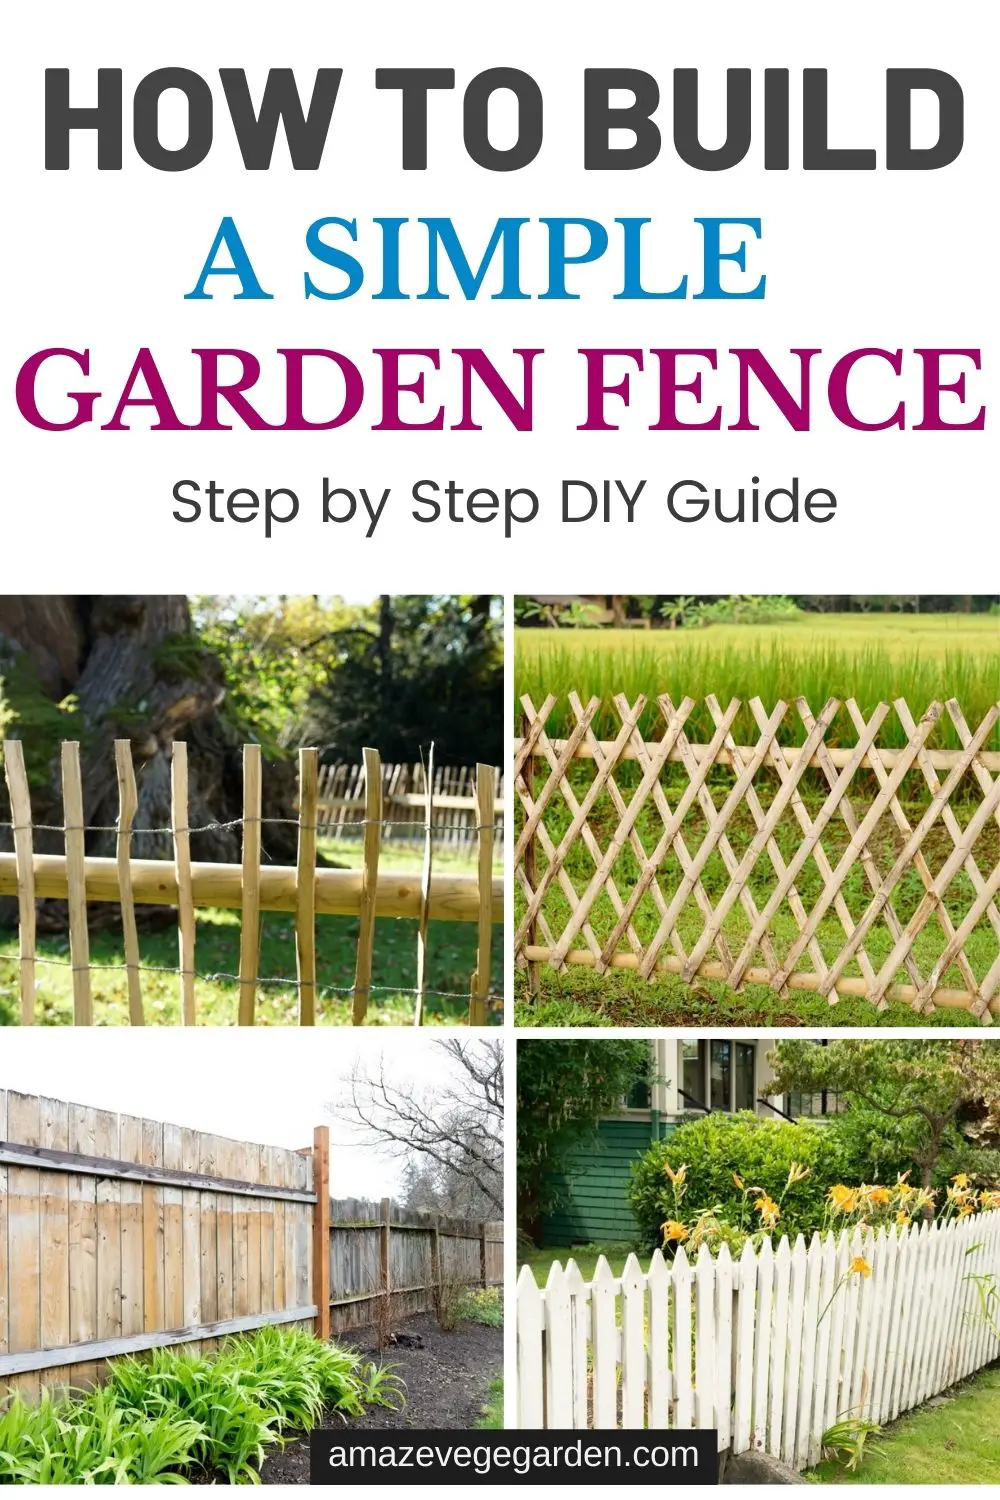 How to Build a Simple Garden Fence